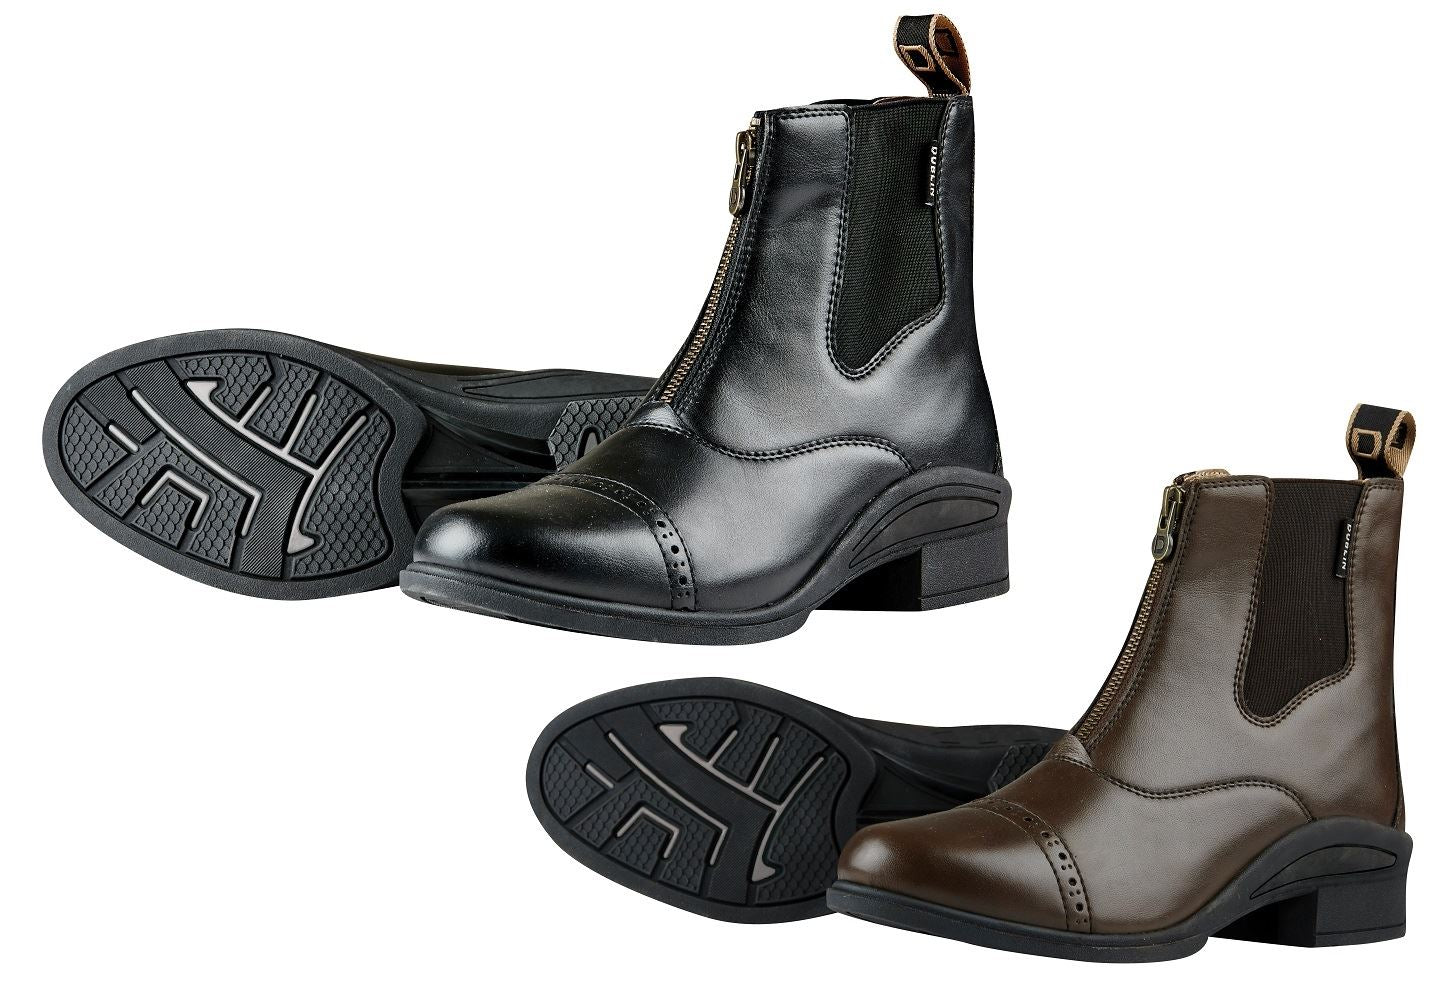 Dublin Altitude Zip Childs Boots - Just Horse Riders